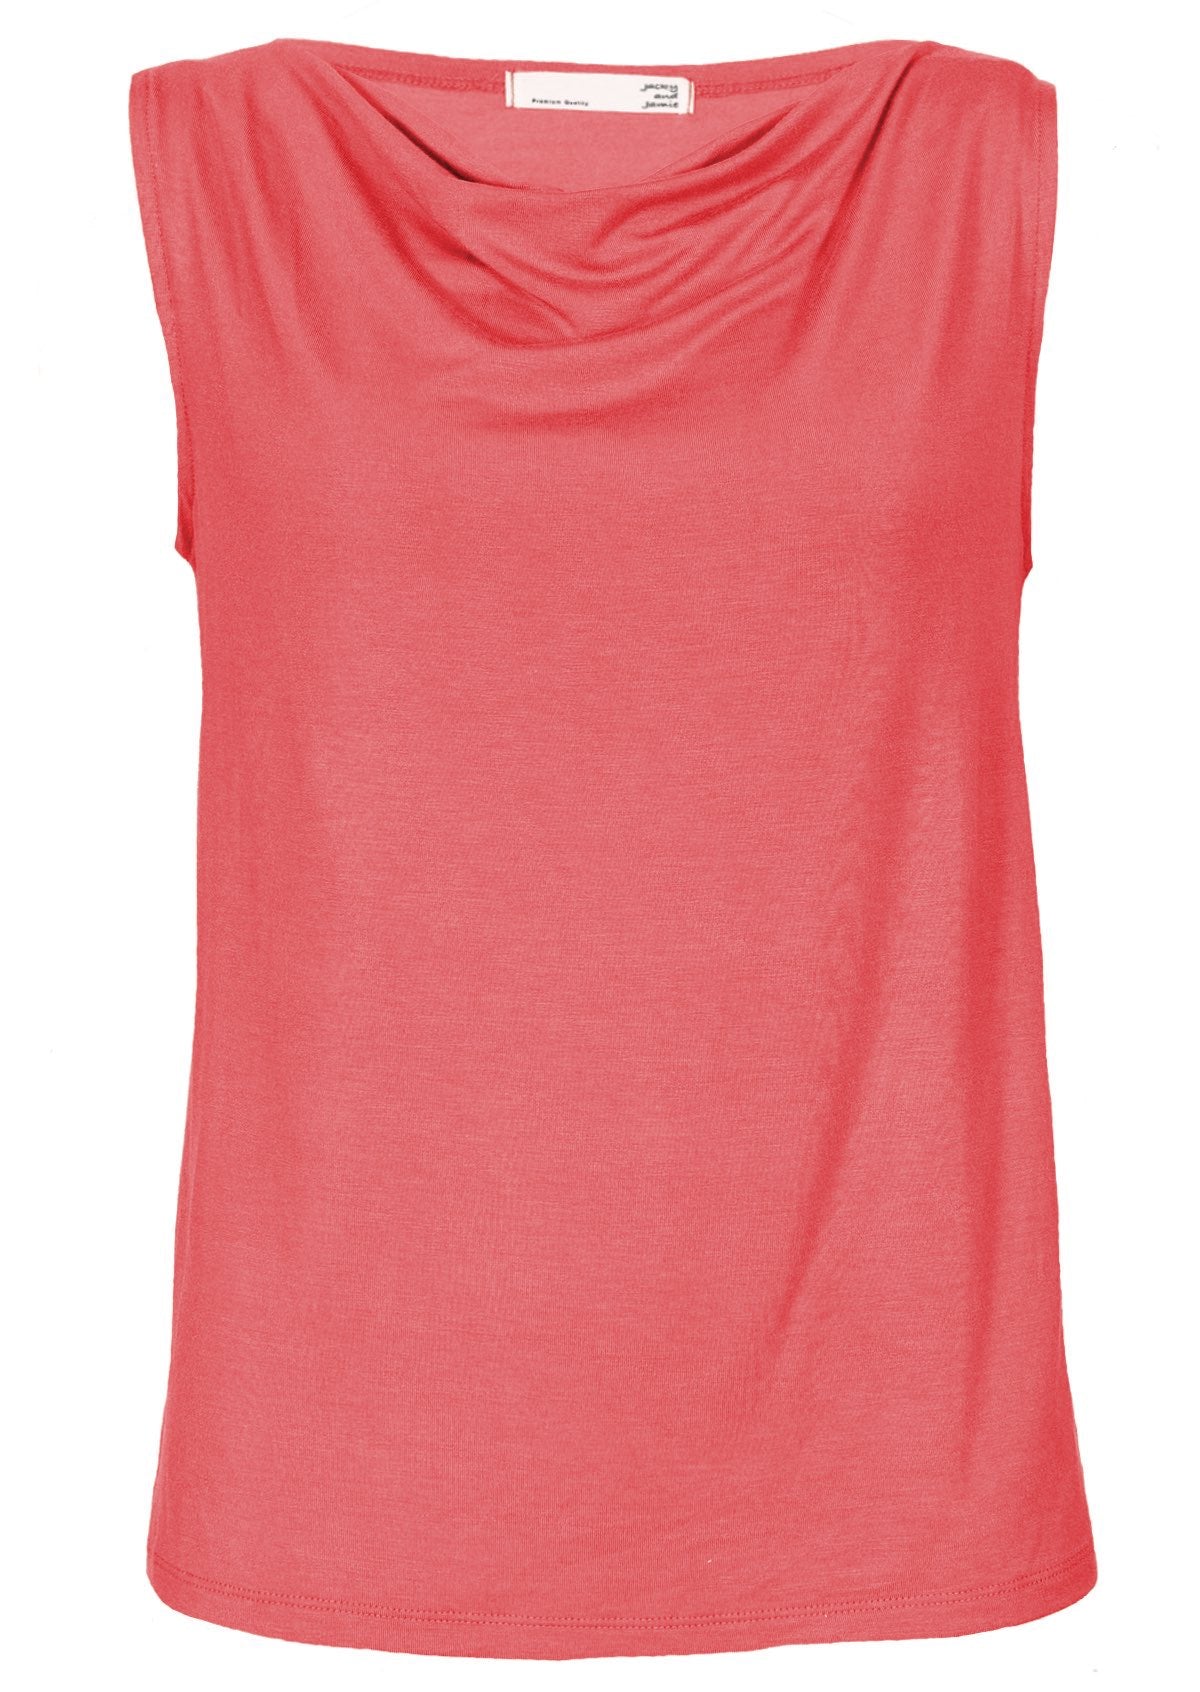 Women's pink basic rayon top front view